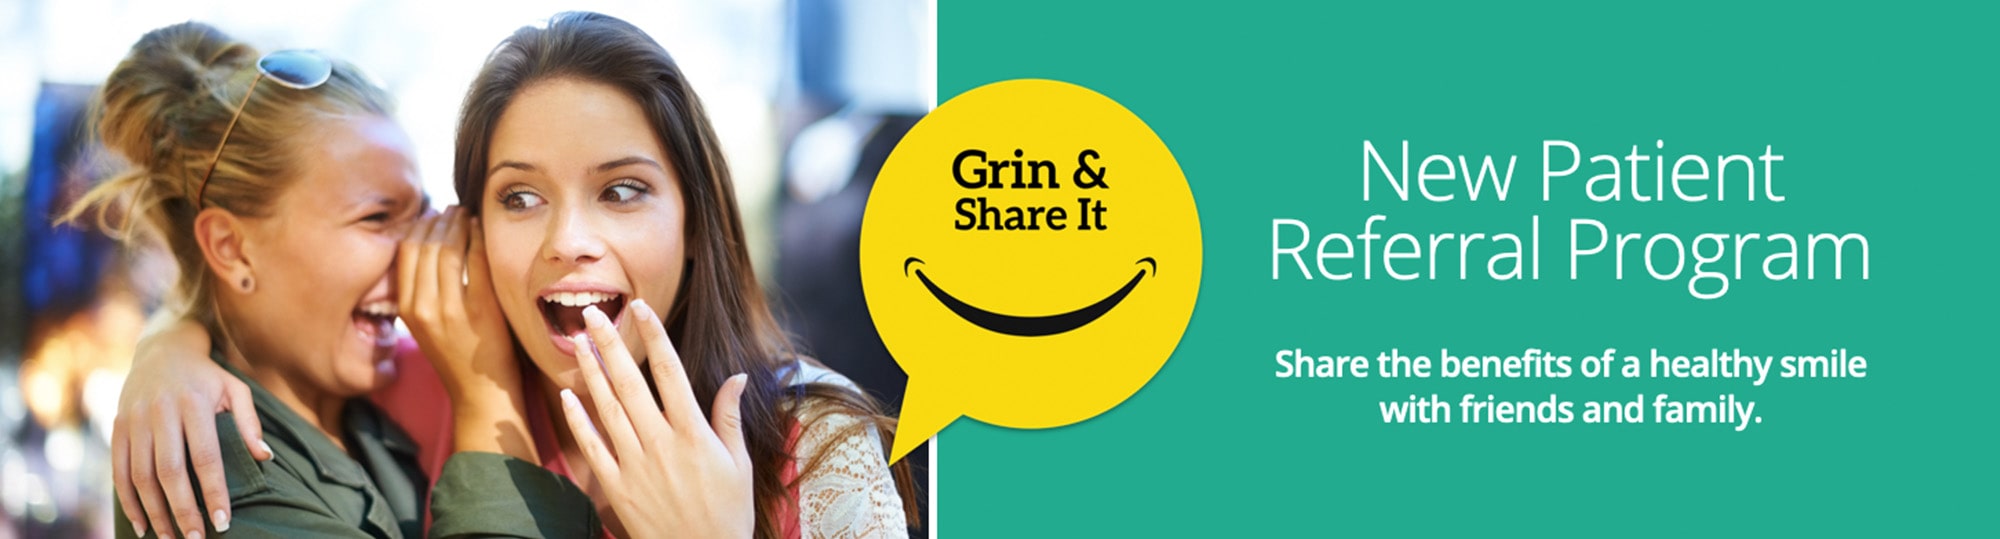 grin and share it referral program.